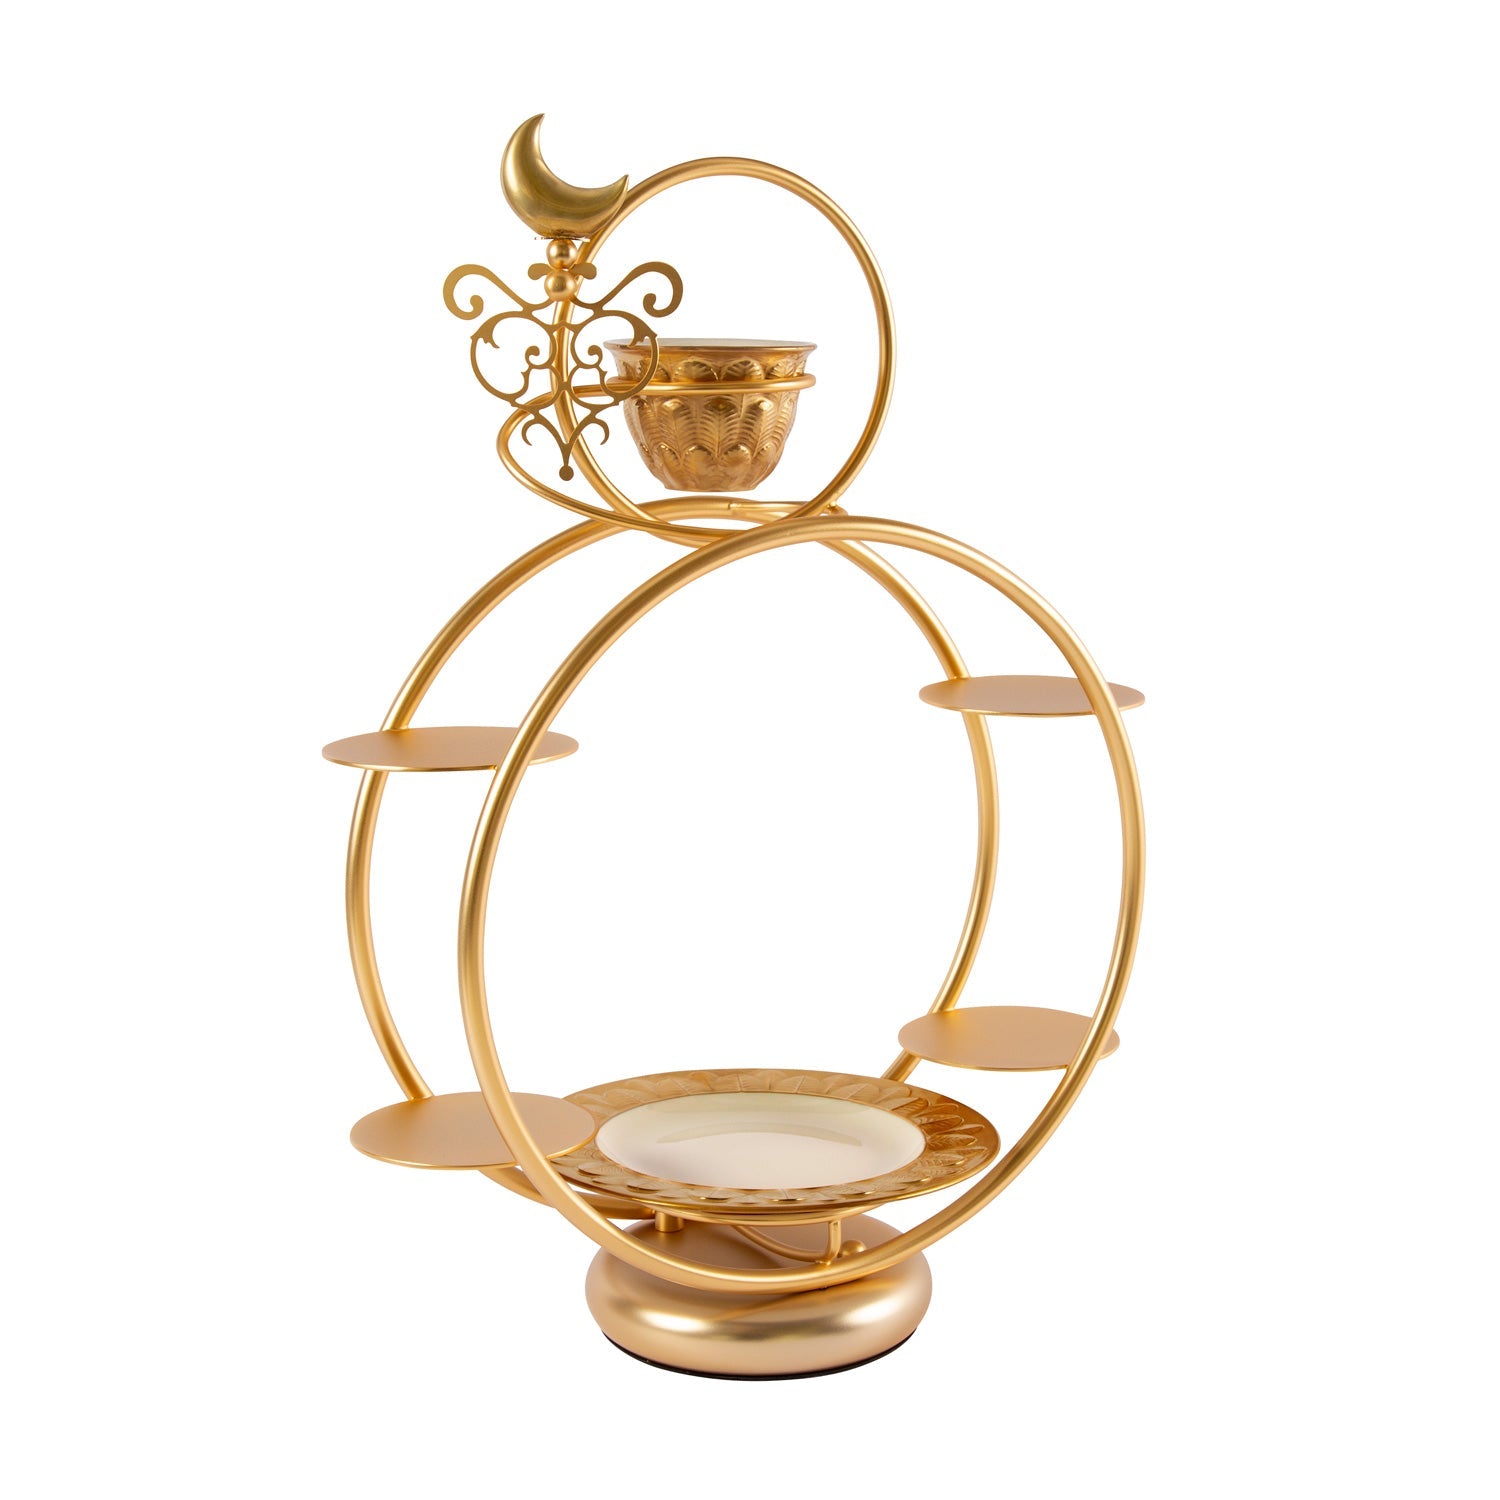 EXTRAVAGANZA - Round Pastry Holder & Coffee Cup - Gold